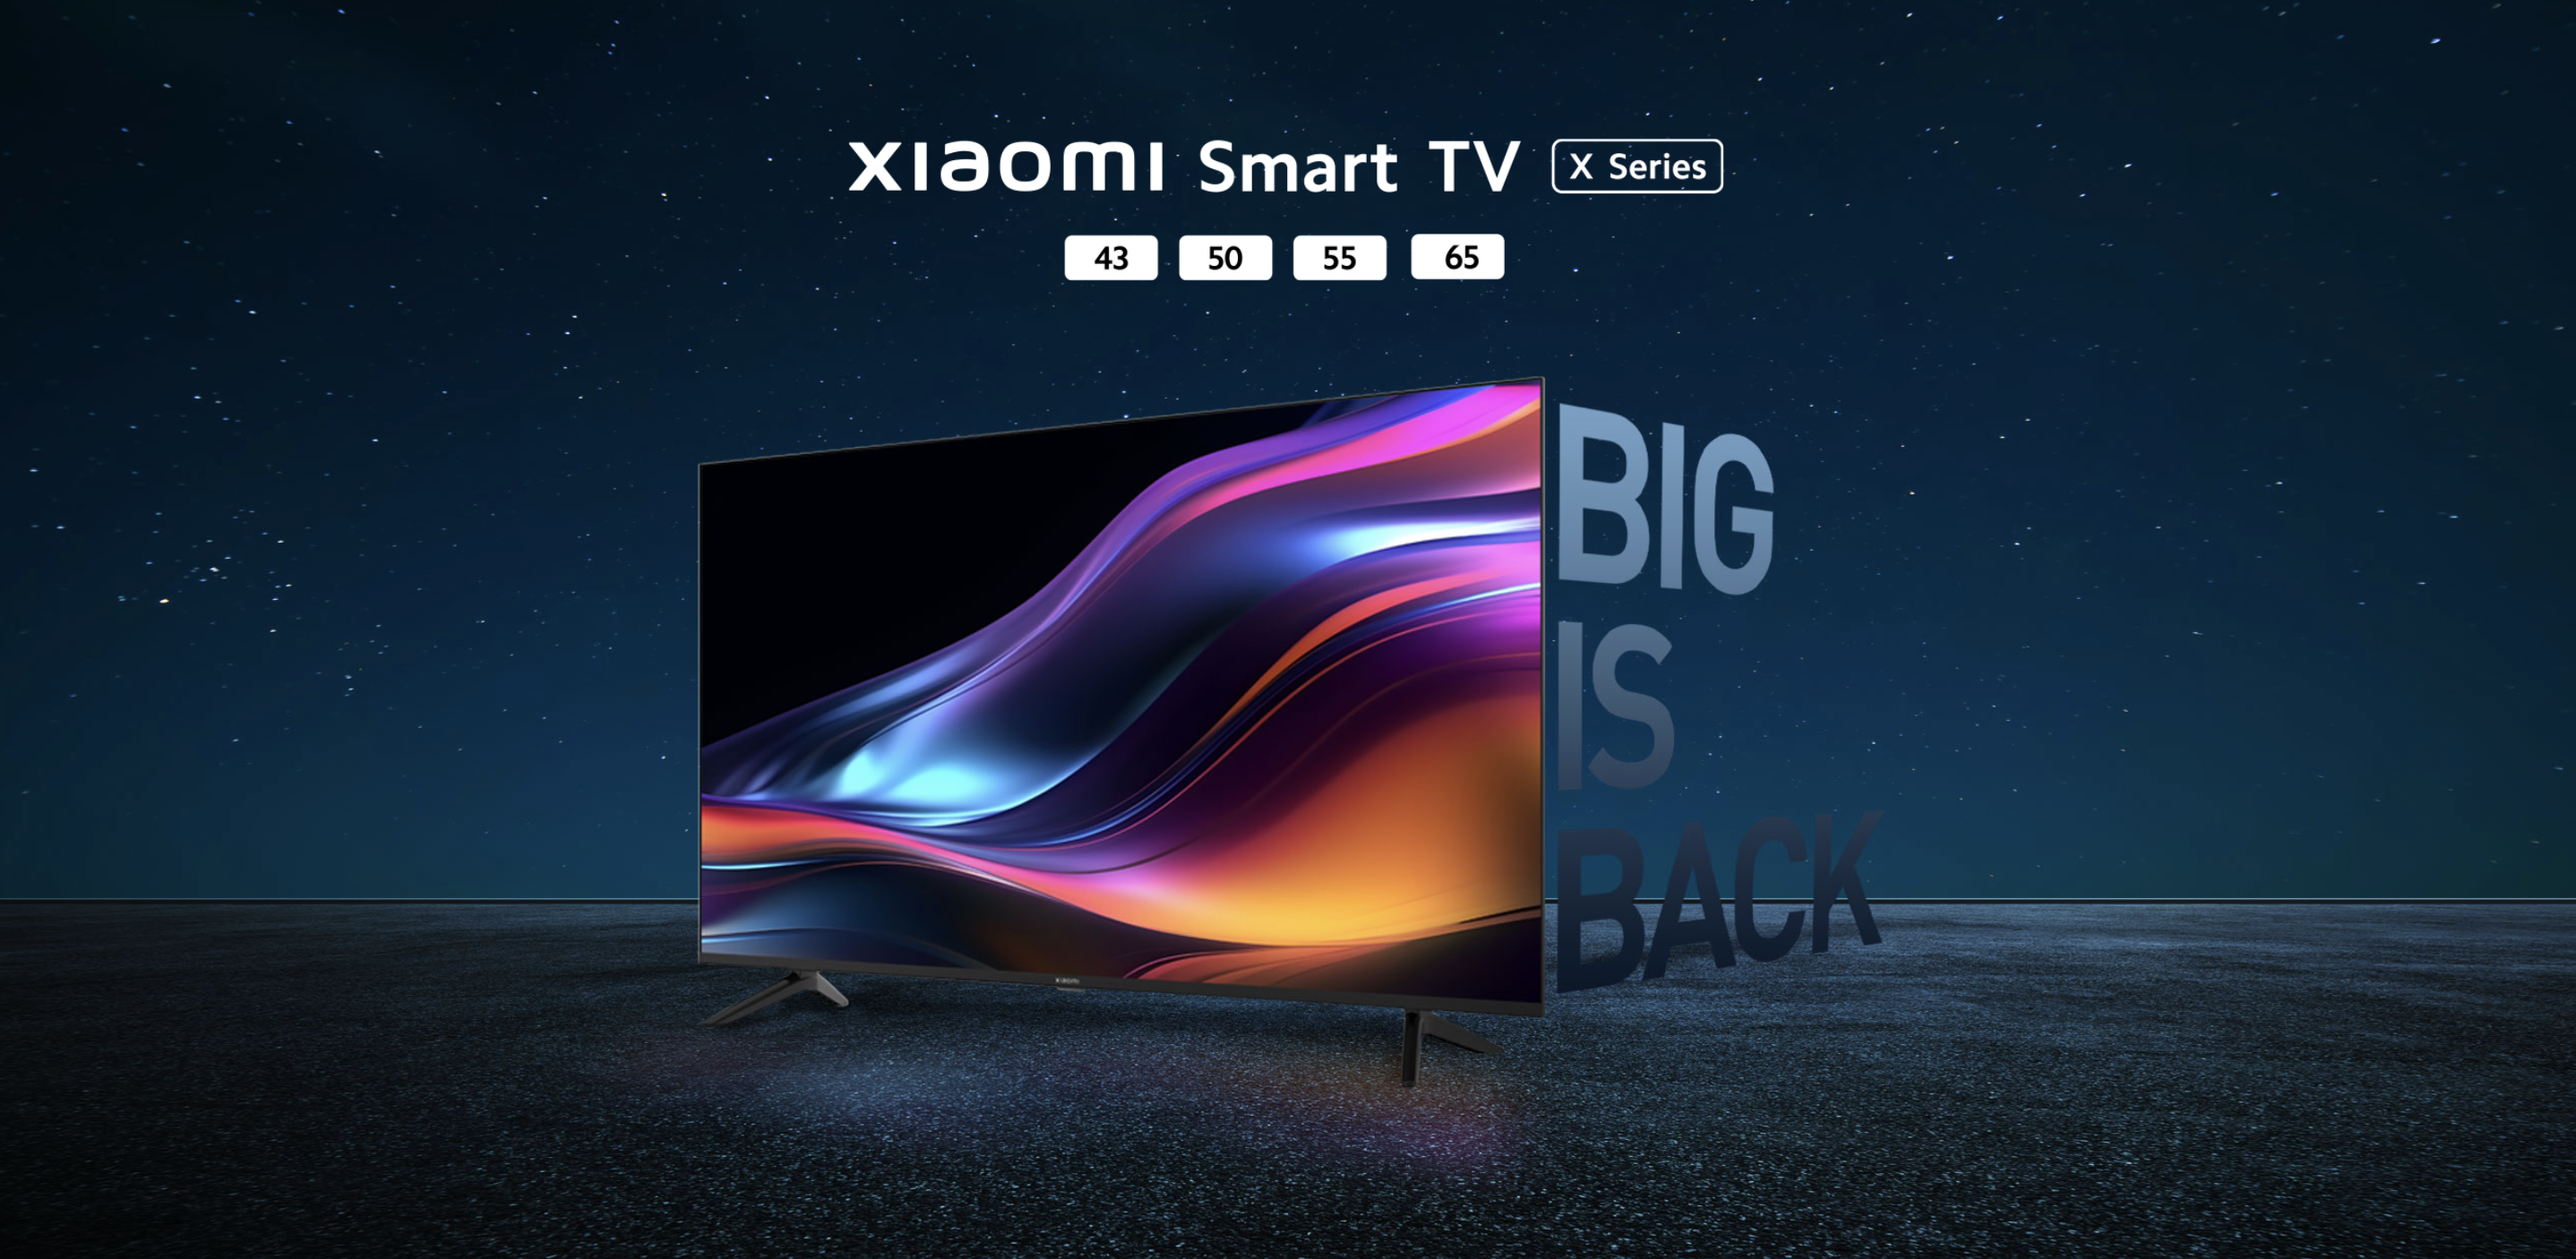 Xiaomi has unveiled an updated Smart TV X series with screens up to 65″, 4K resolution and 30W speakers with Dolby Audio support